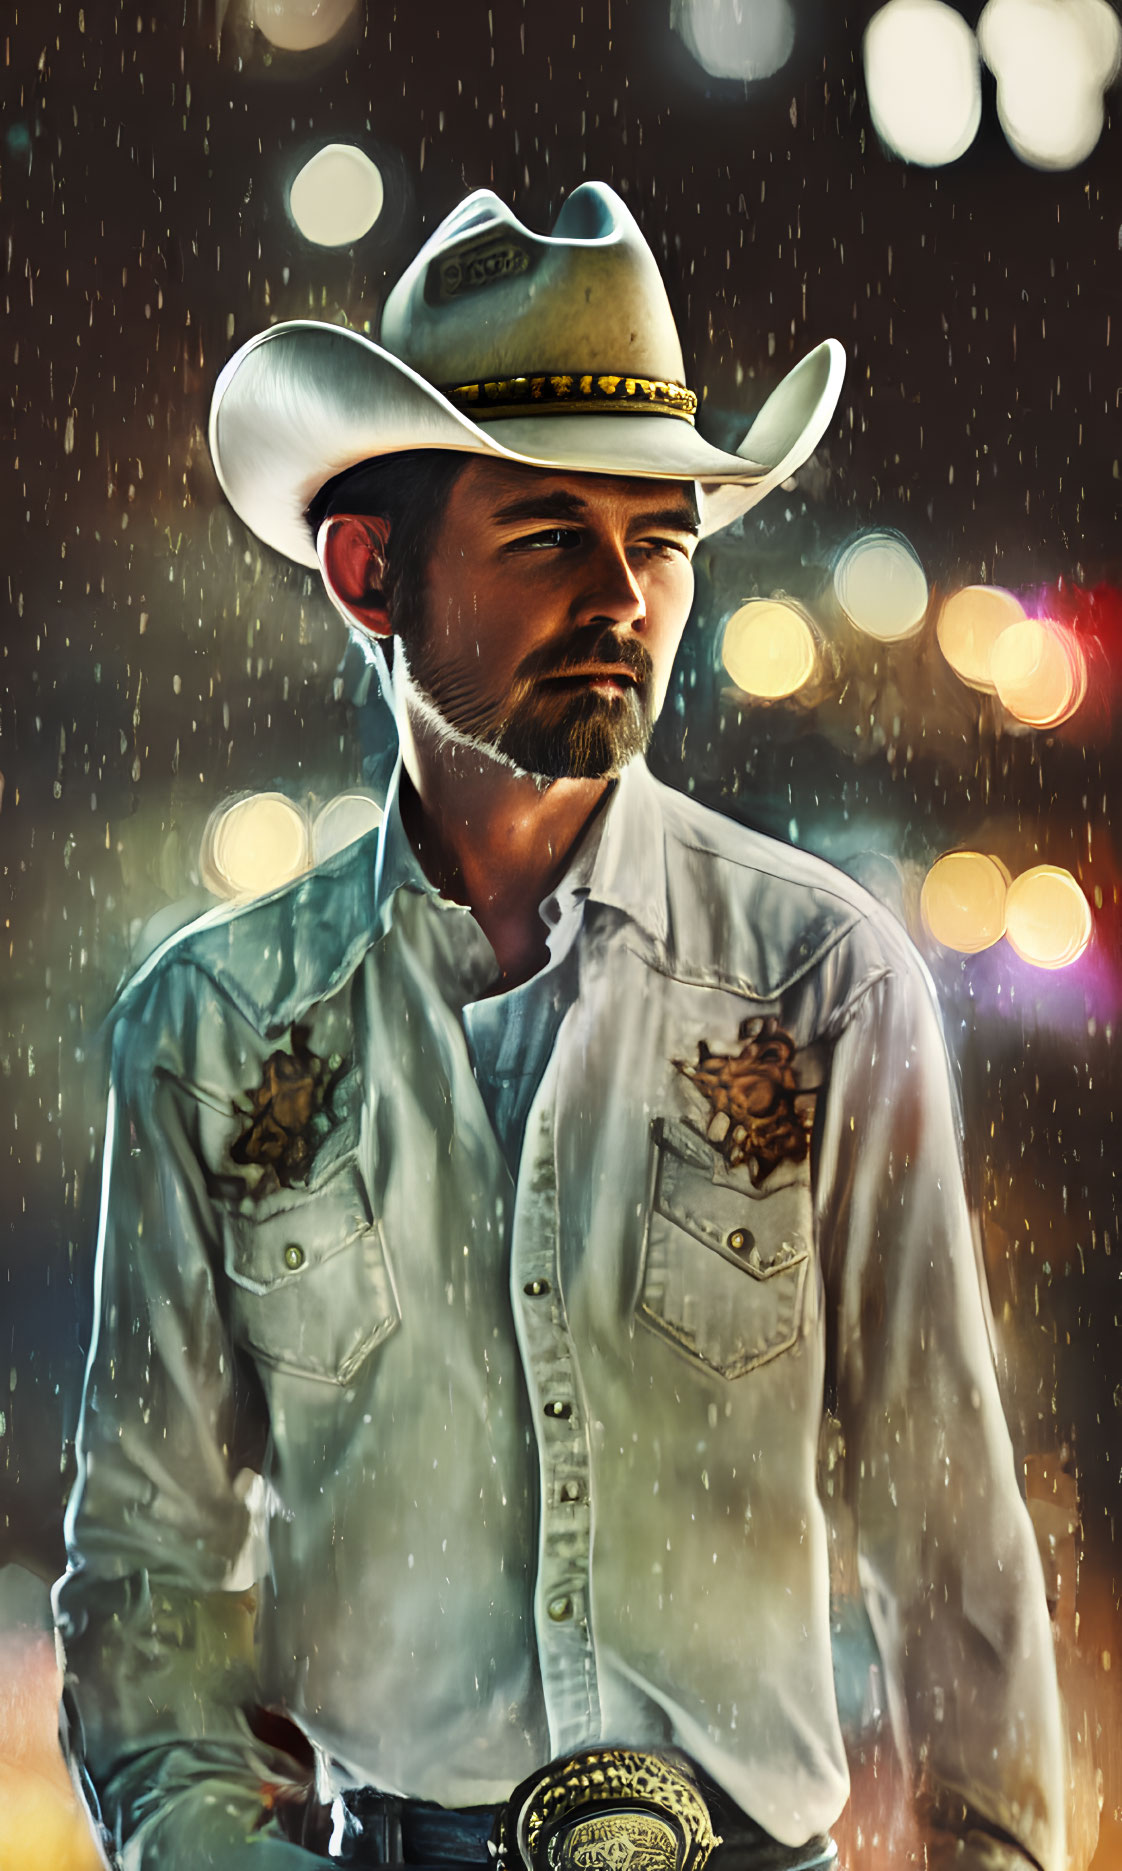 Stylized portrait of man in cowboy hat with bokeh light and raindrops